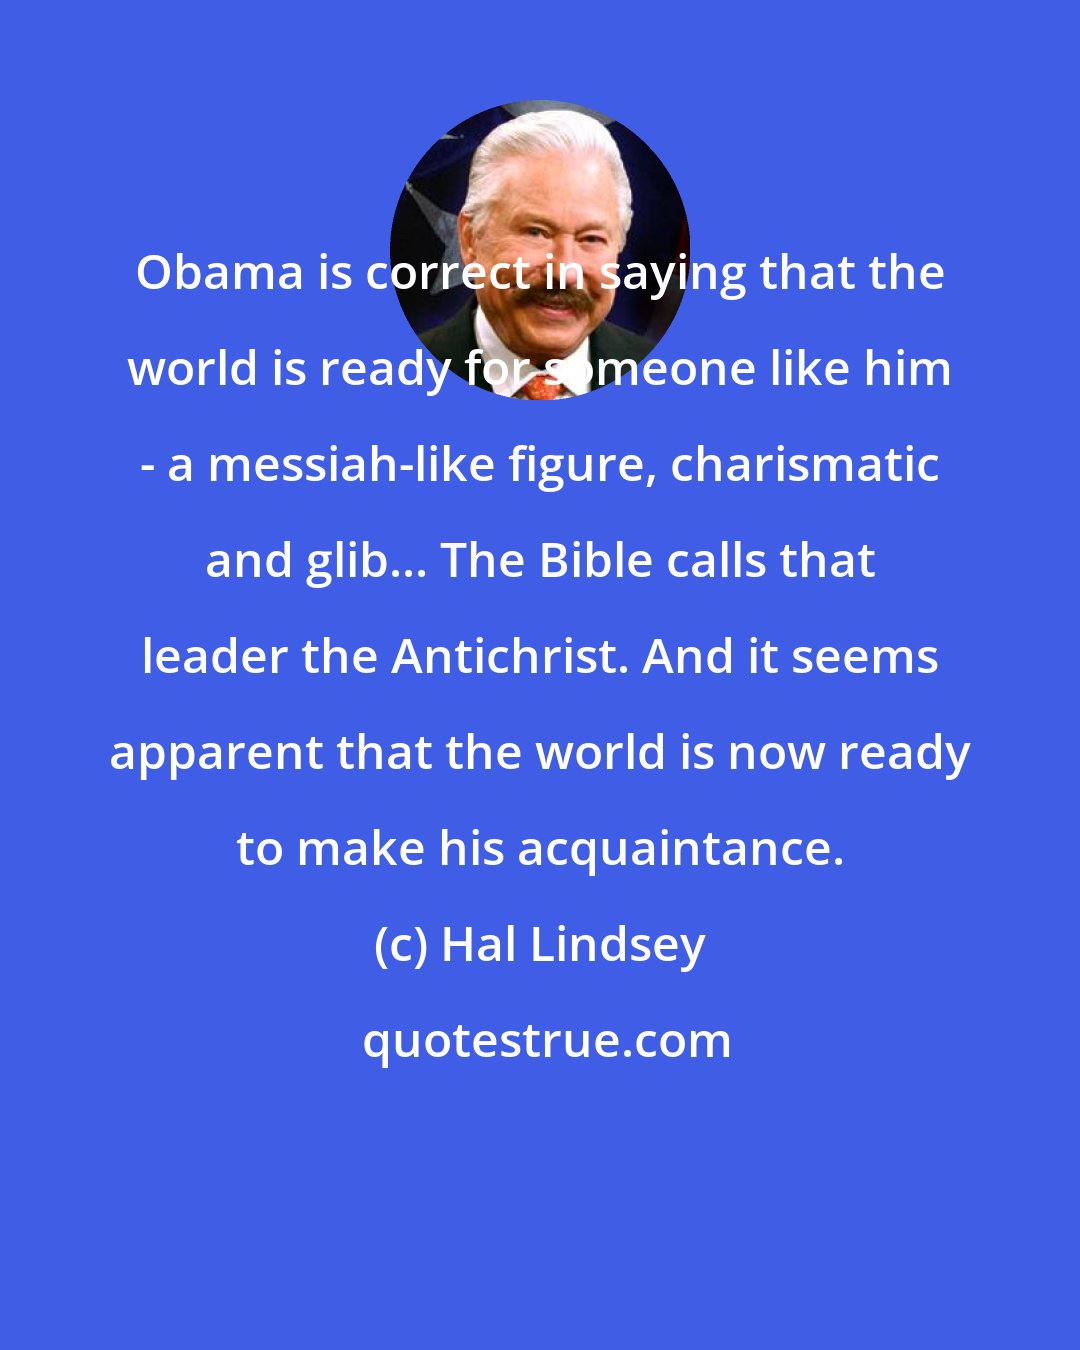 Hal Lindsey: Obama is correct in saying that the world is ready for someone like him - a messiah-like figure, charismatic and glib... The Bible calls that leader the Antichrist. And it seems apparent that the world is now ready to make his acquaintance.